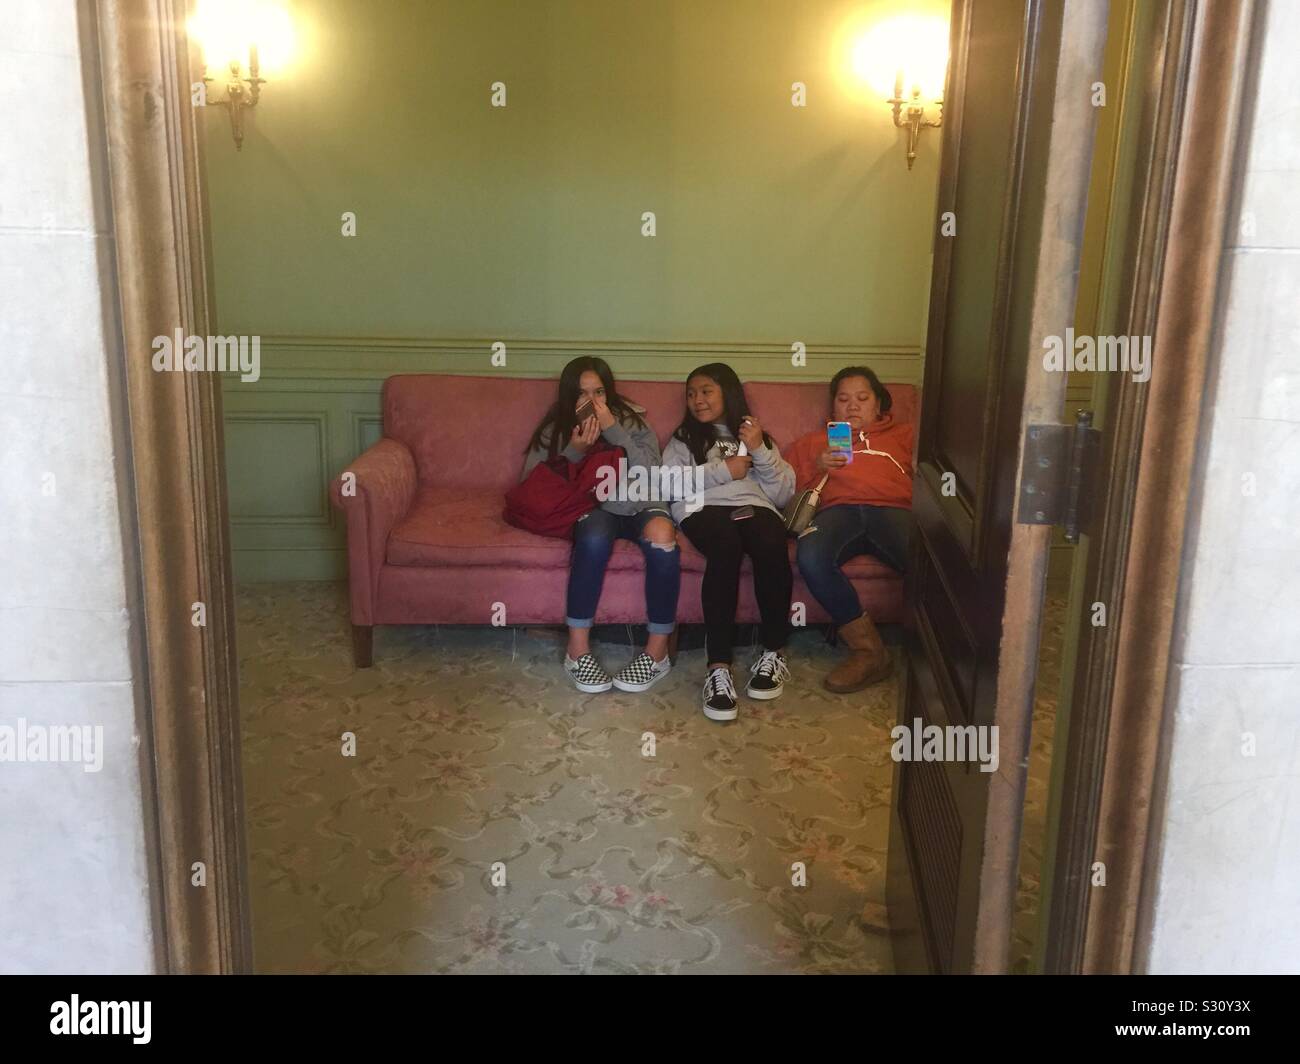 Girls on a pink couch holding cell phones in the bathroom lounge in the War Memorial Opera House during intermission of a San Francisco Opera matinee. San Francisco, California. Stock Photo